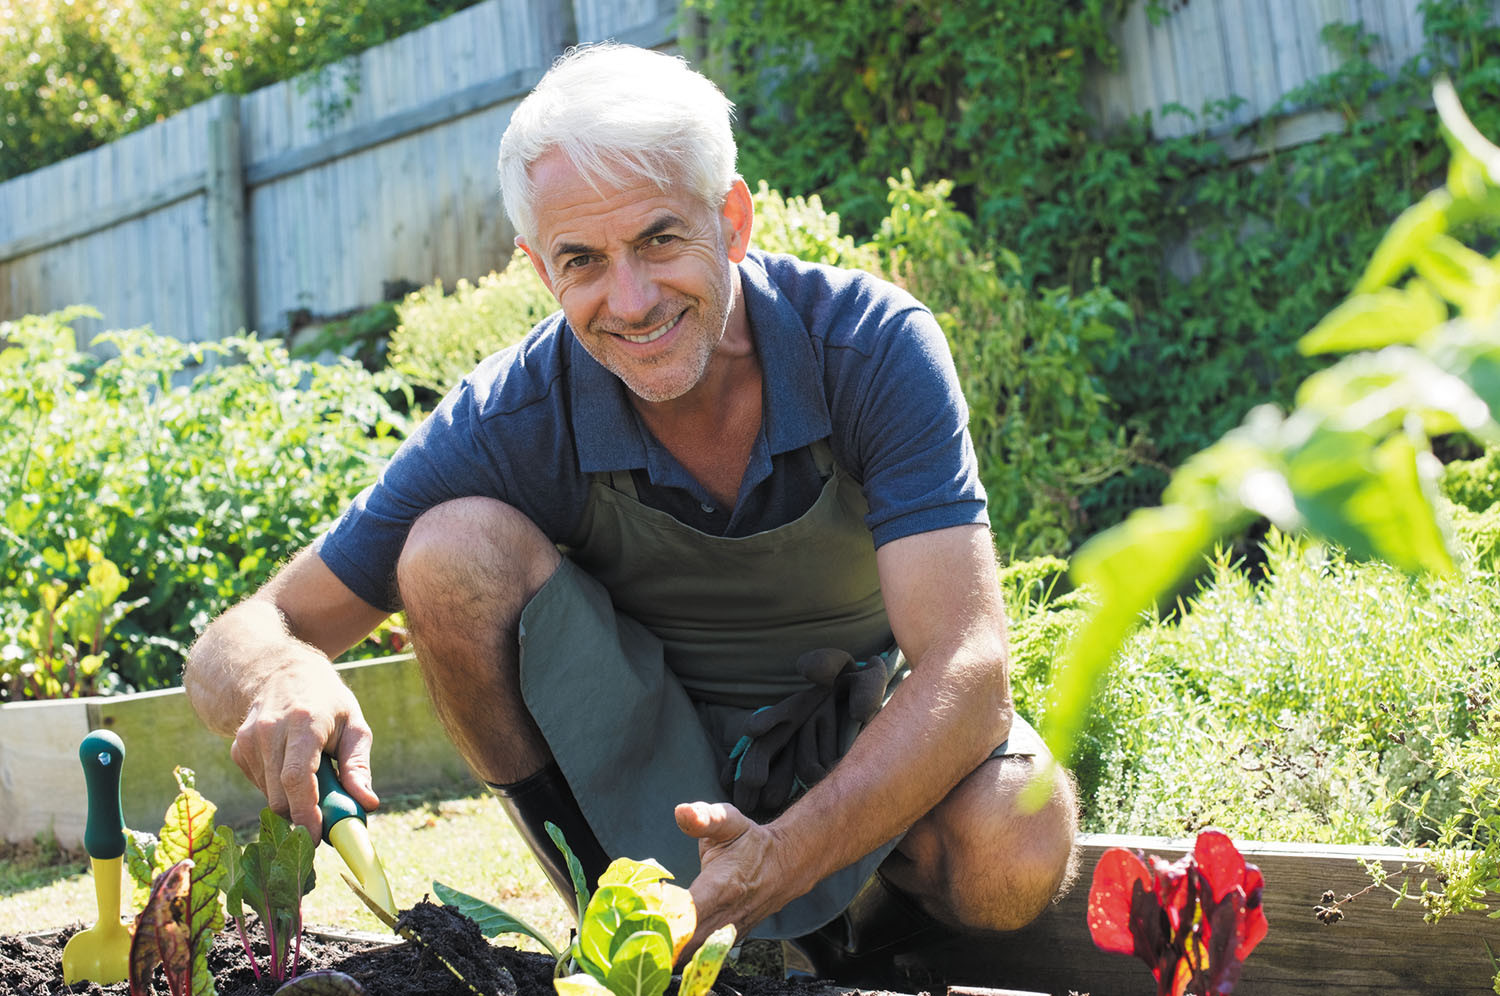 photo of a mature man crouching while working in a garden